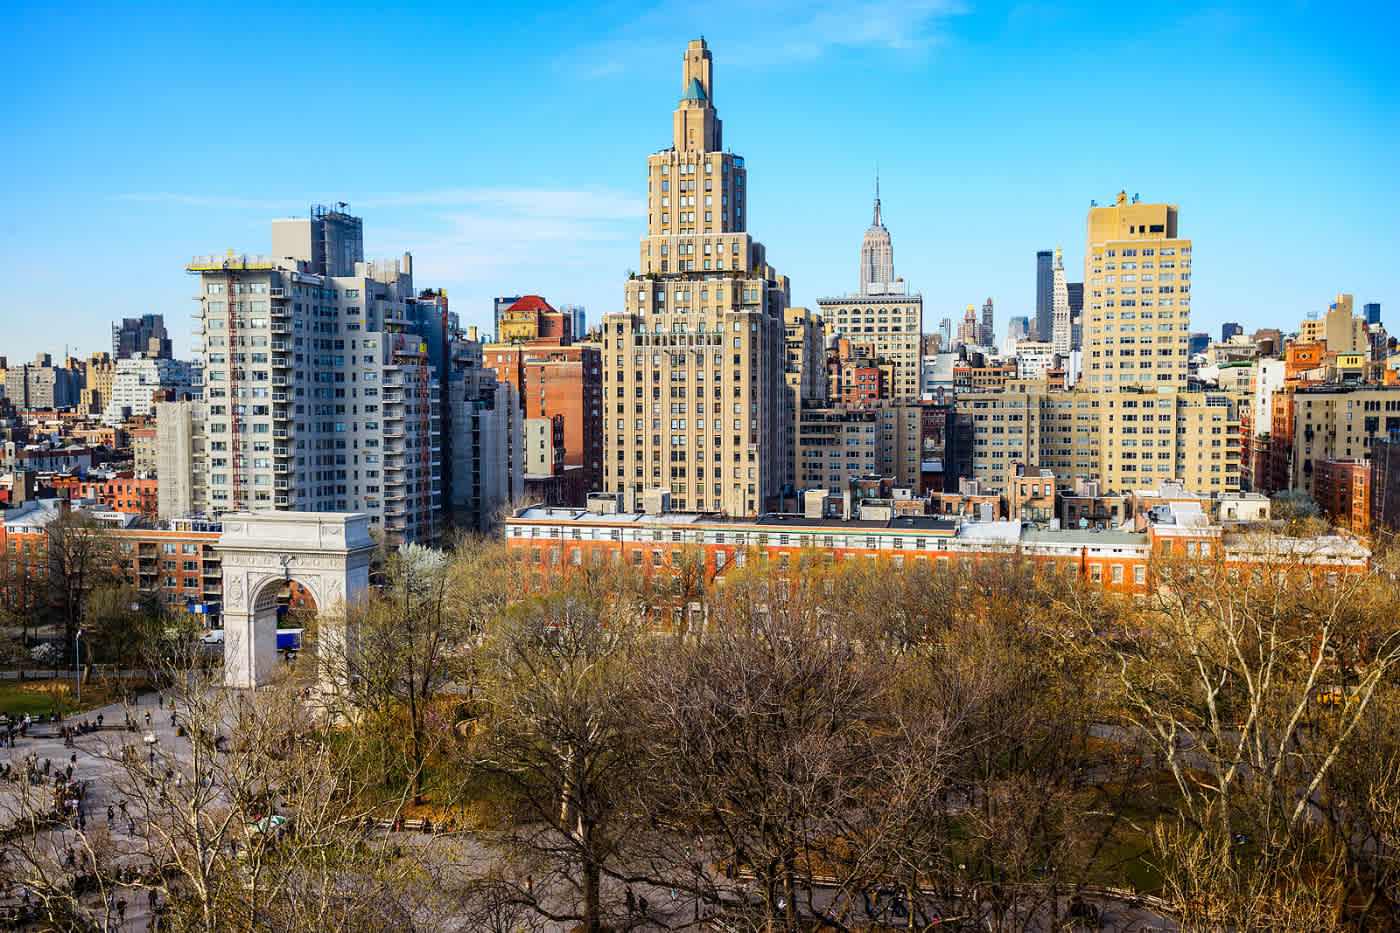 View of Greenwich Village and Washington Square Park